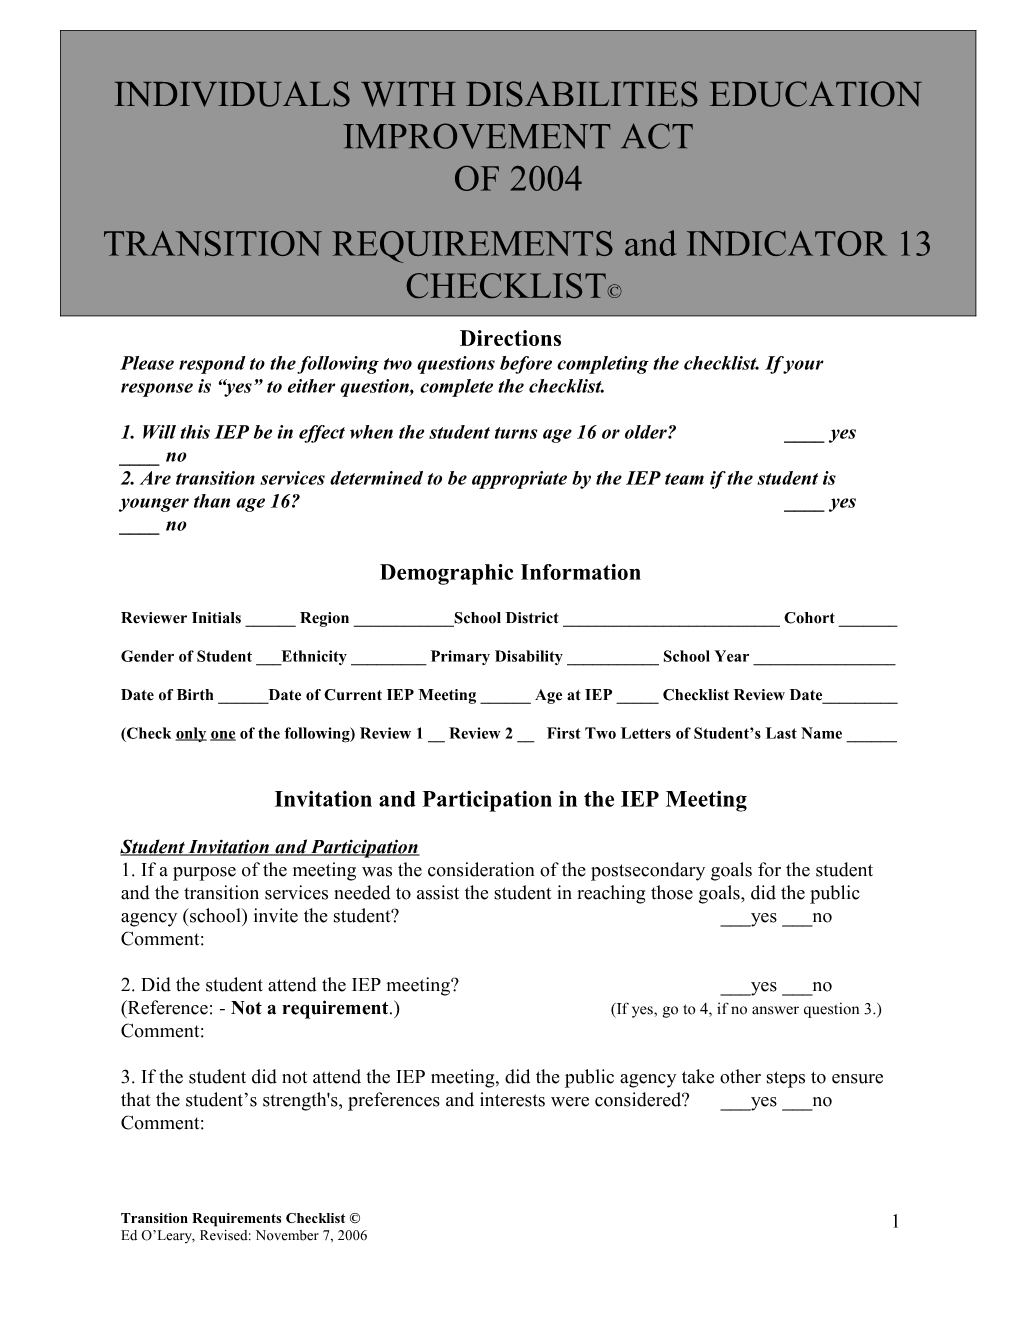 1. Will This IEP Be in Effect When the Student Turns Age 16 Or Older? ____ Yes ____ No